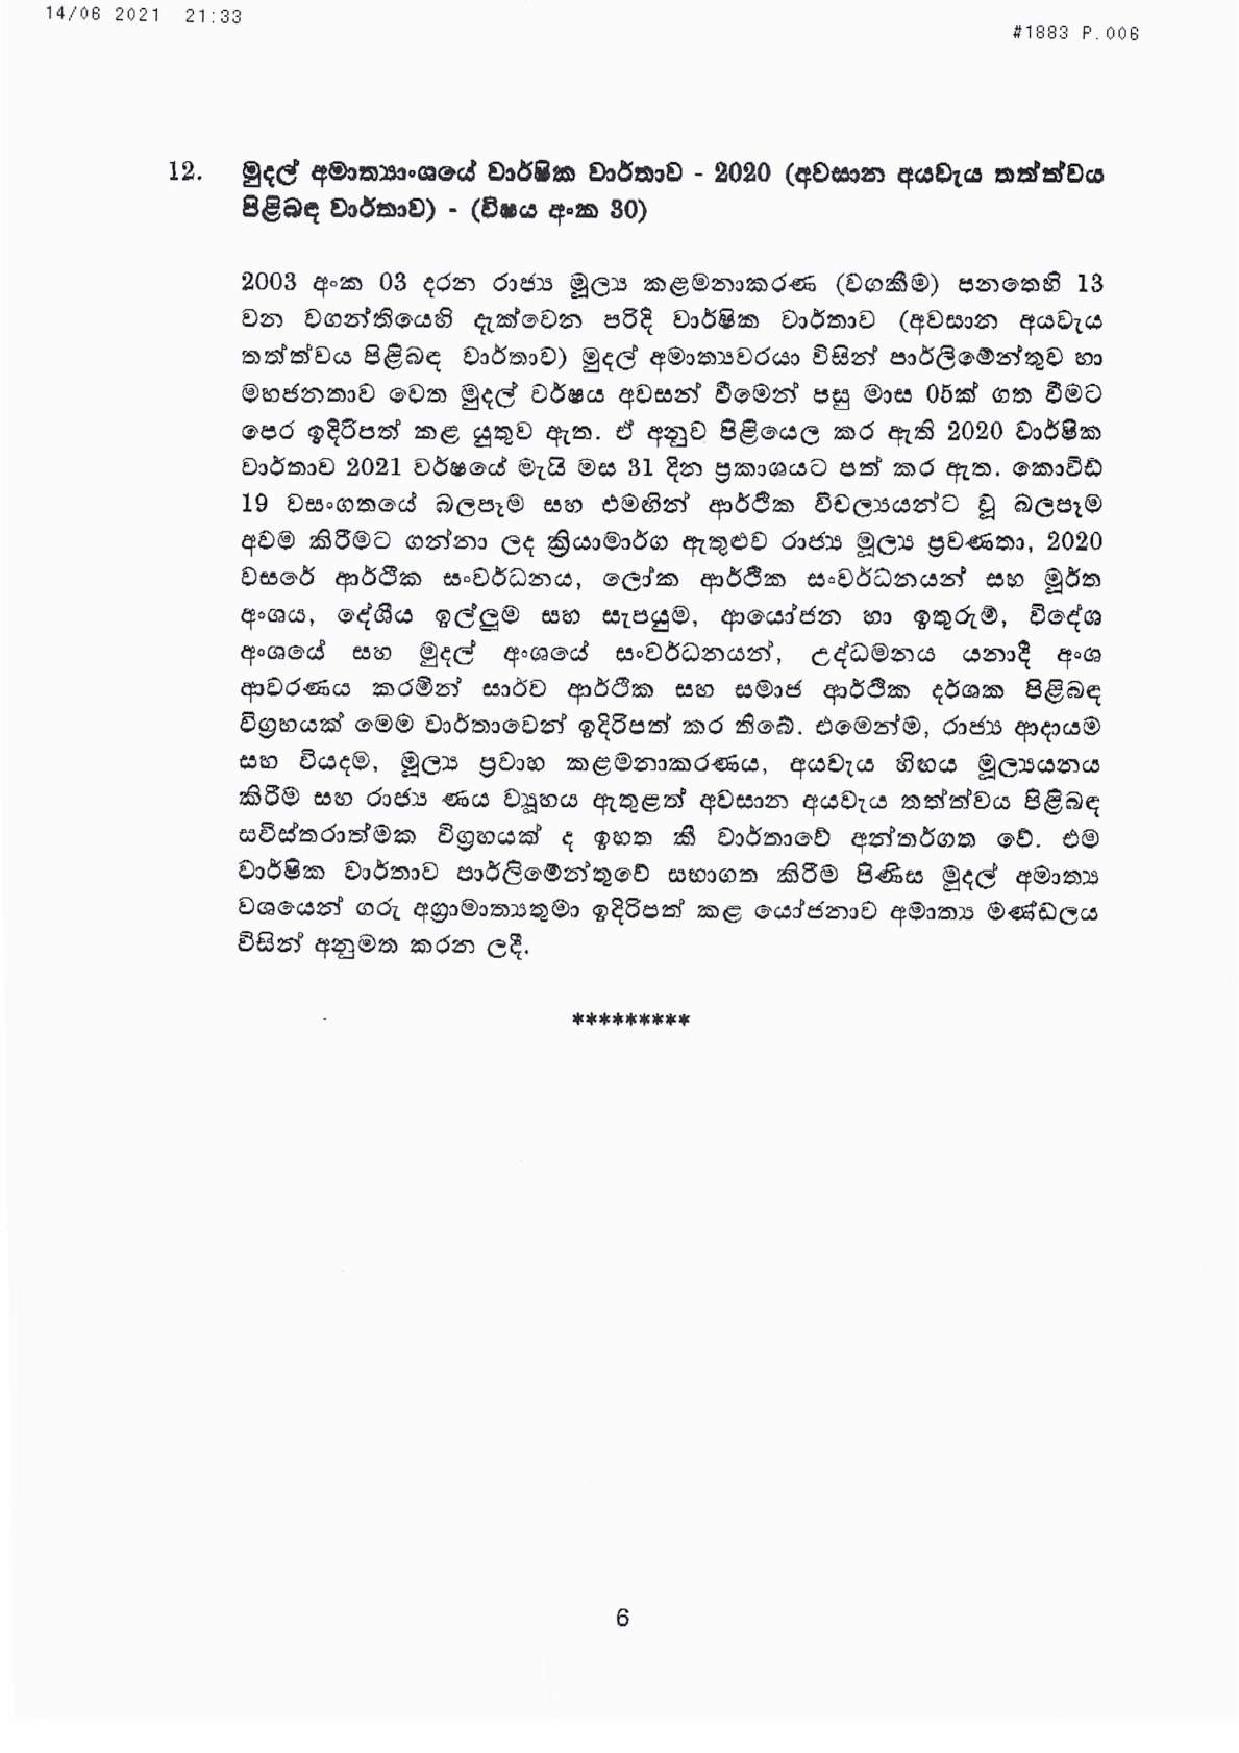 Cabinet Decisions on 14.06.2021 page 006